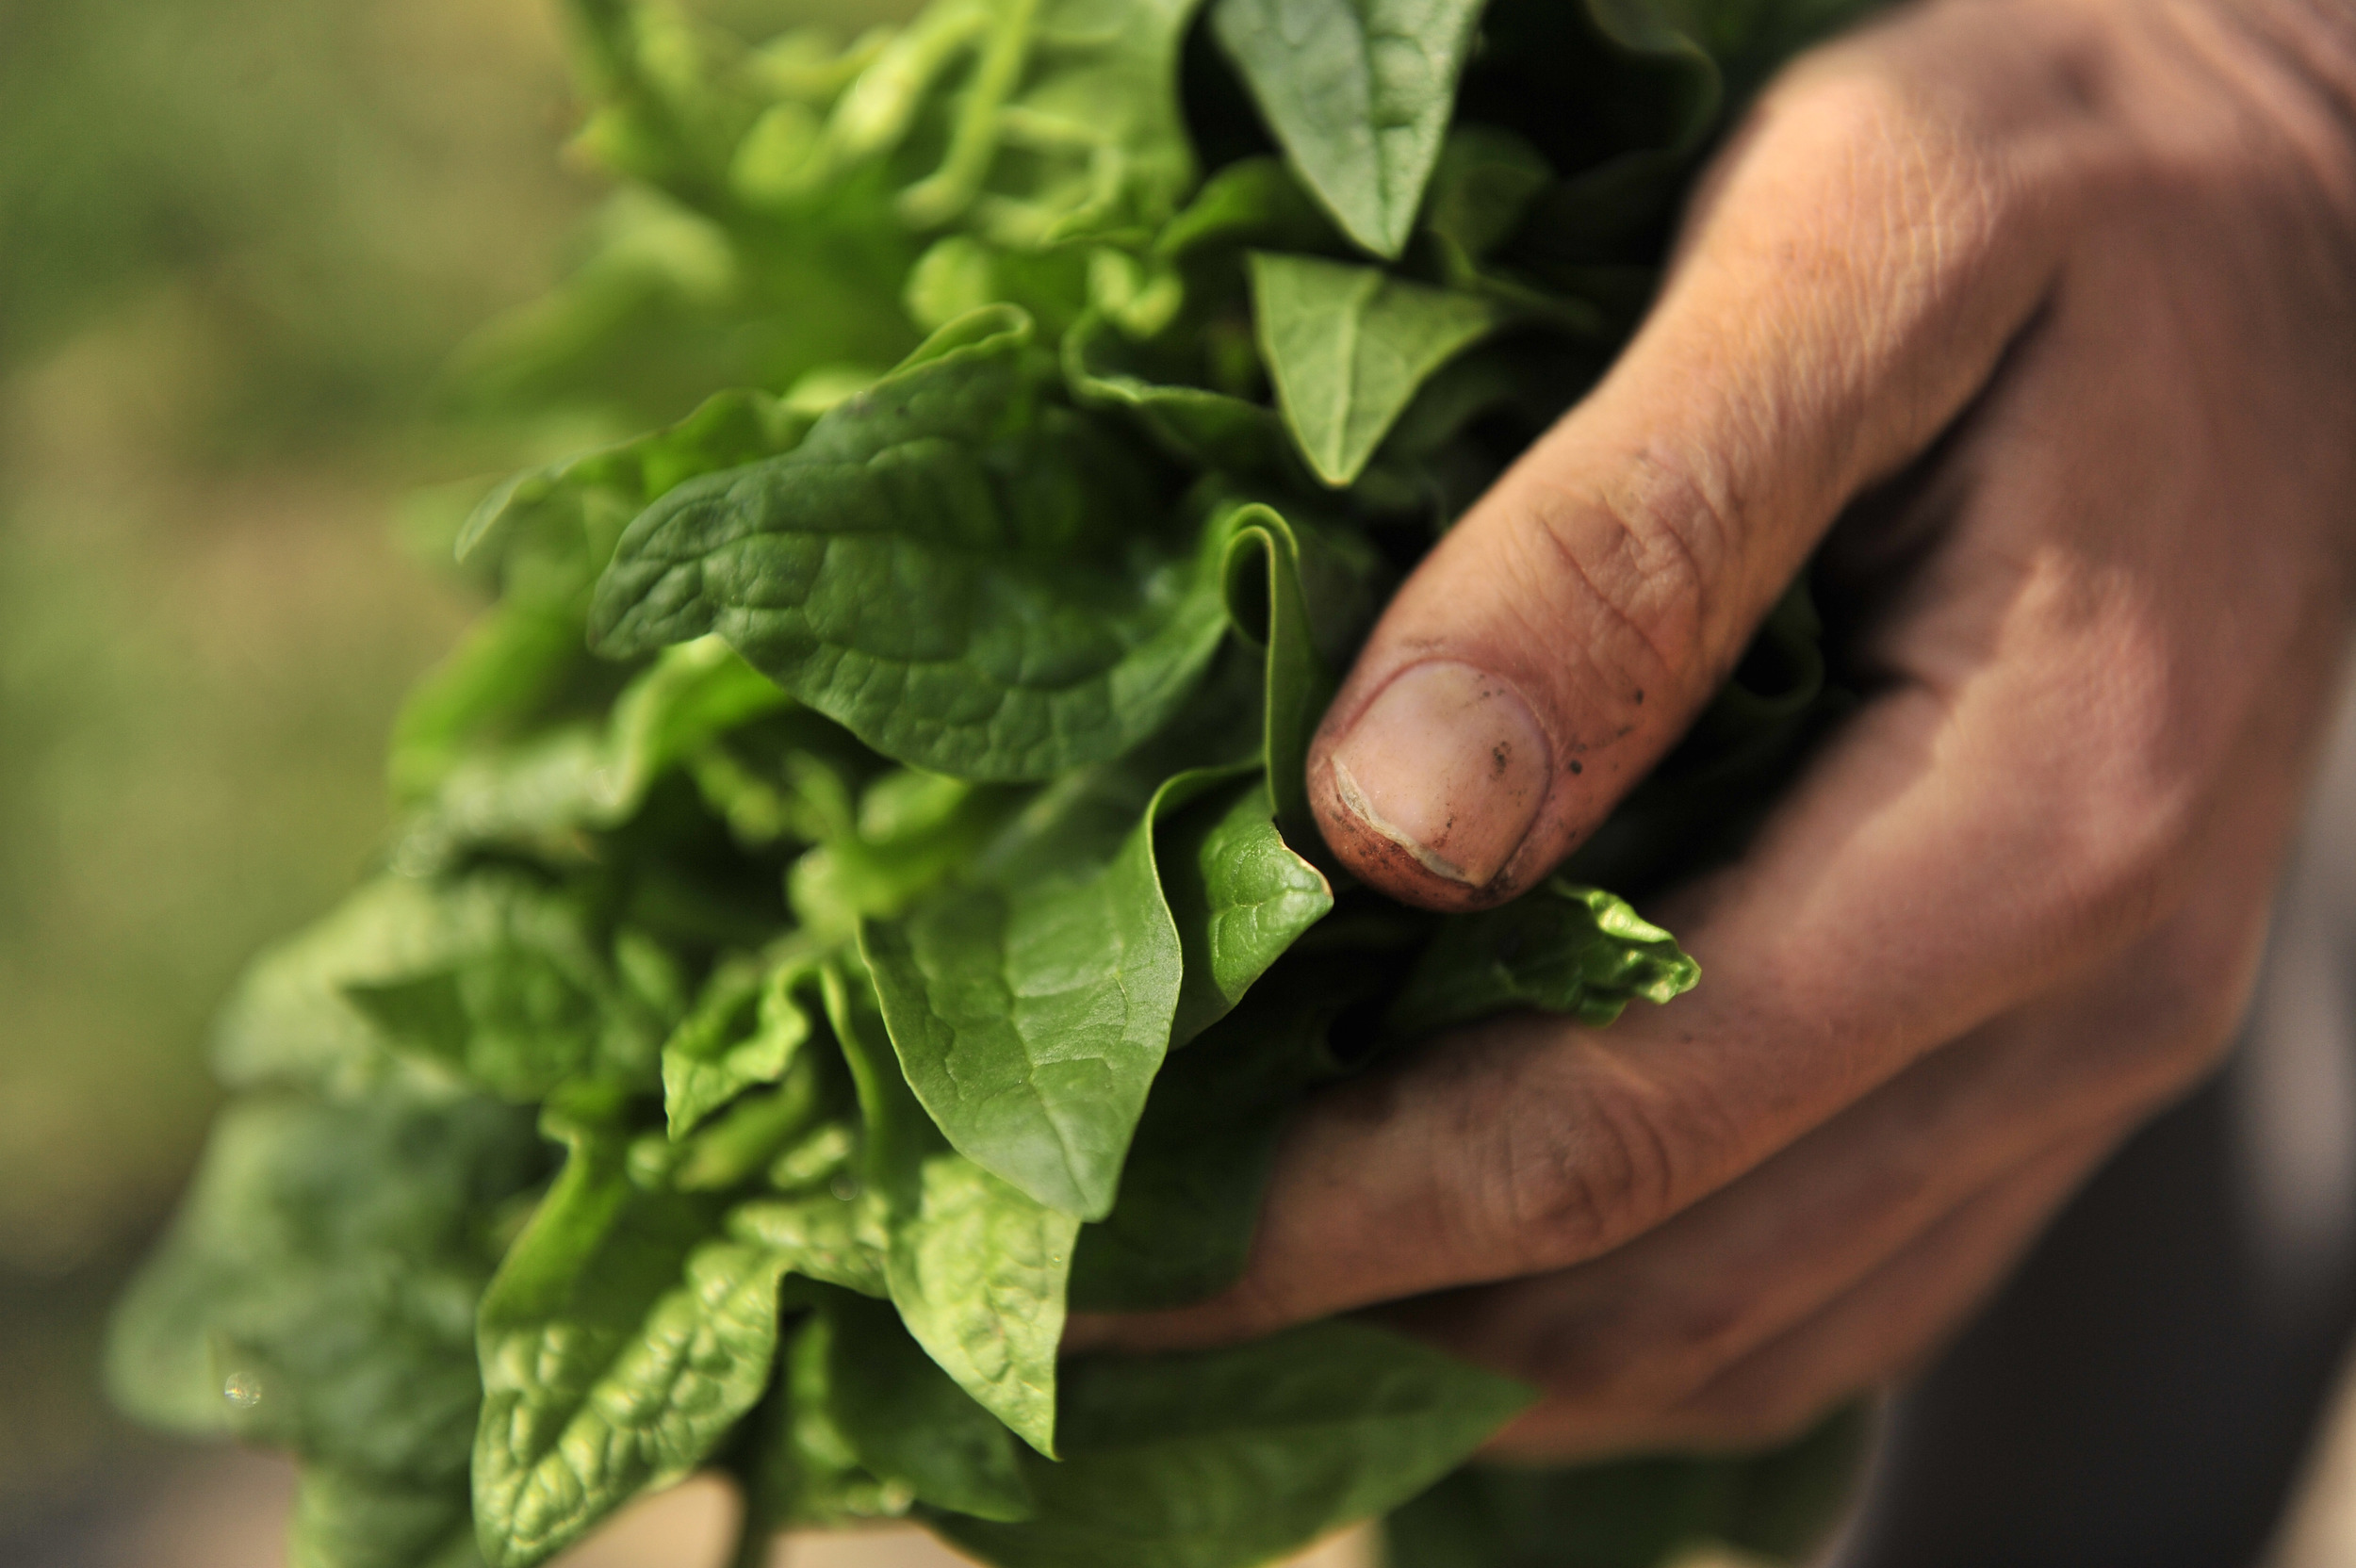  Jeremy Lekich of Nashville Foodscapes harvests spinach from a bed in Sylvan Park in Nashville, Tenn. 